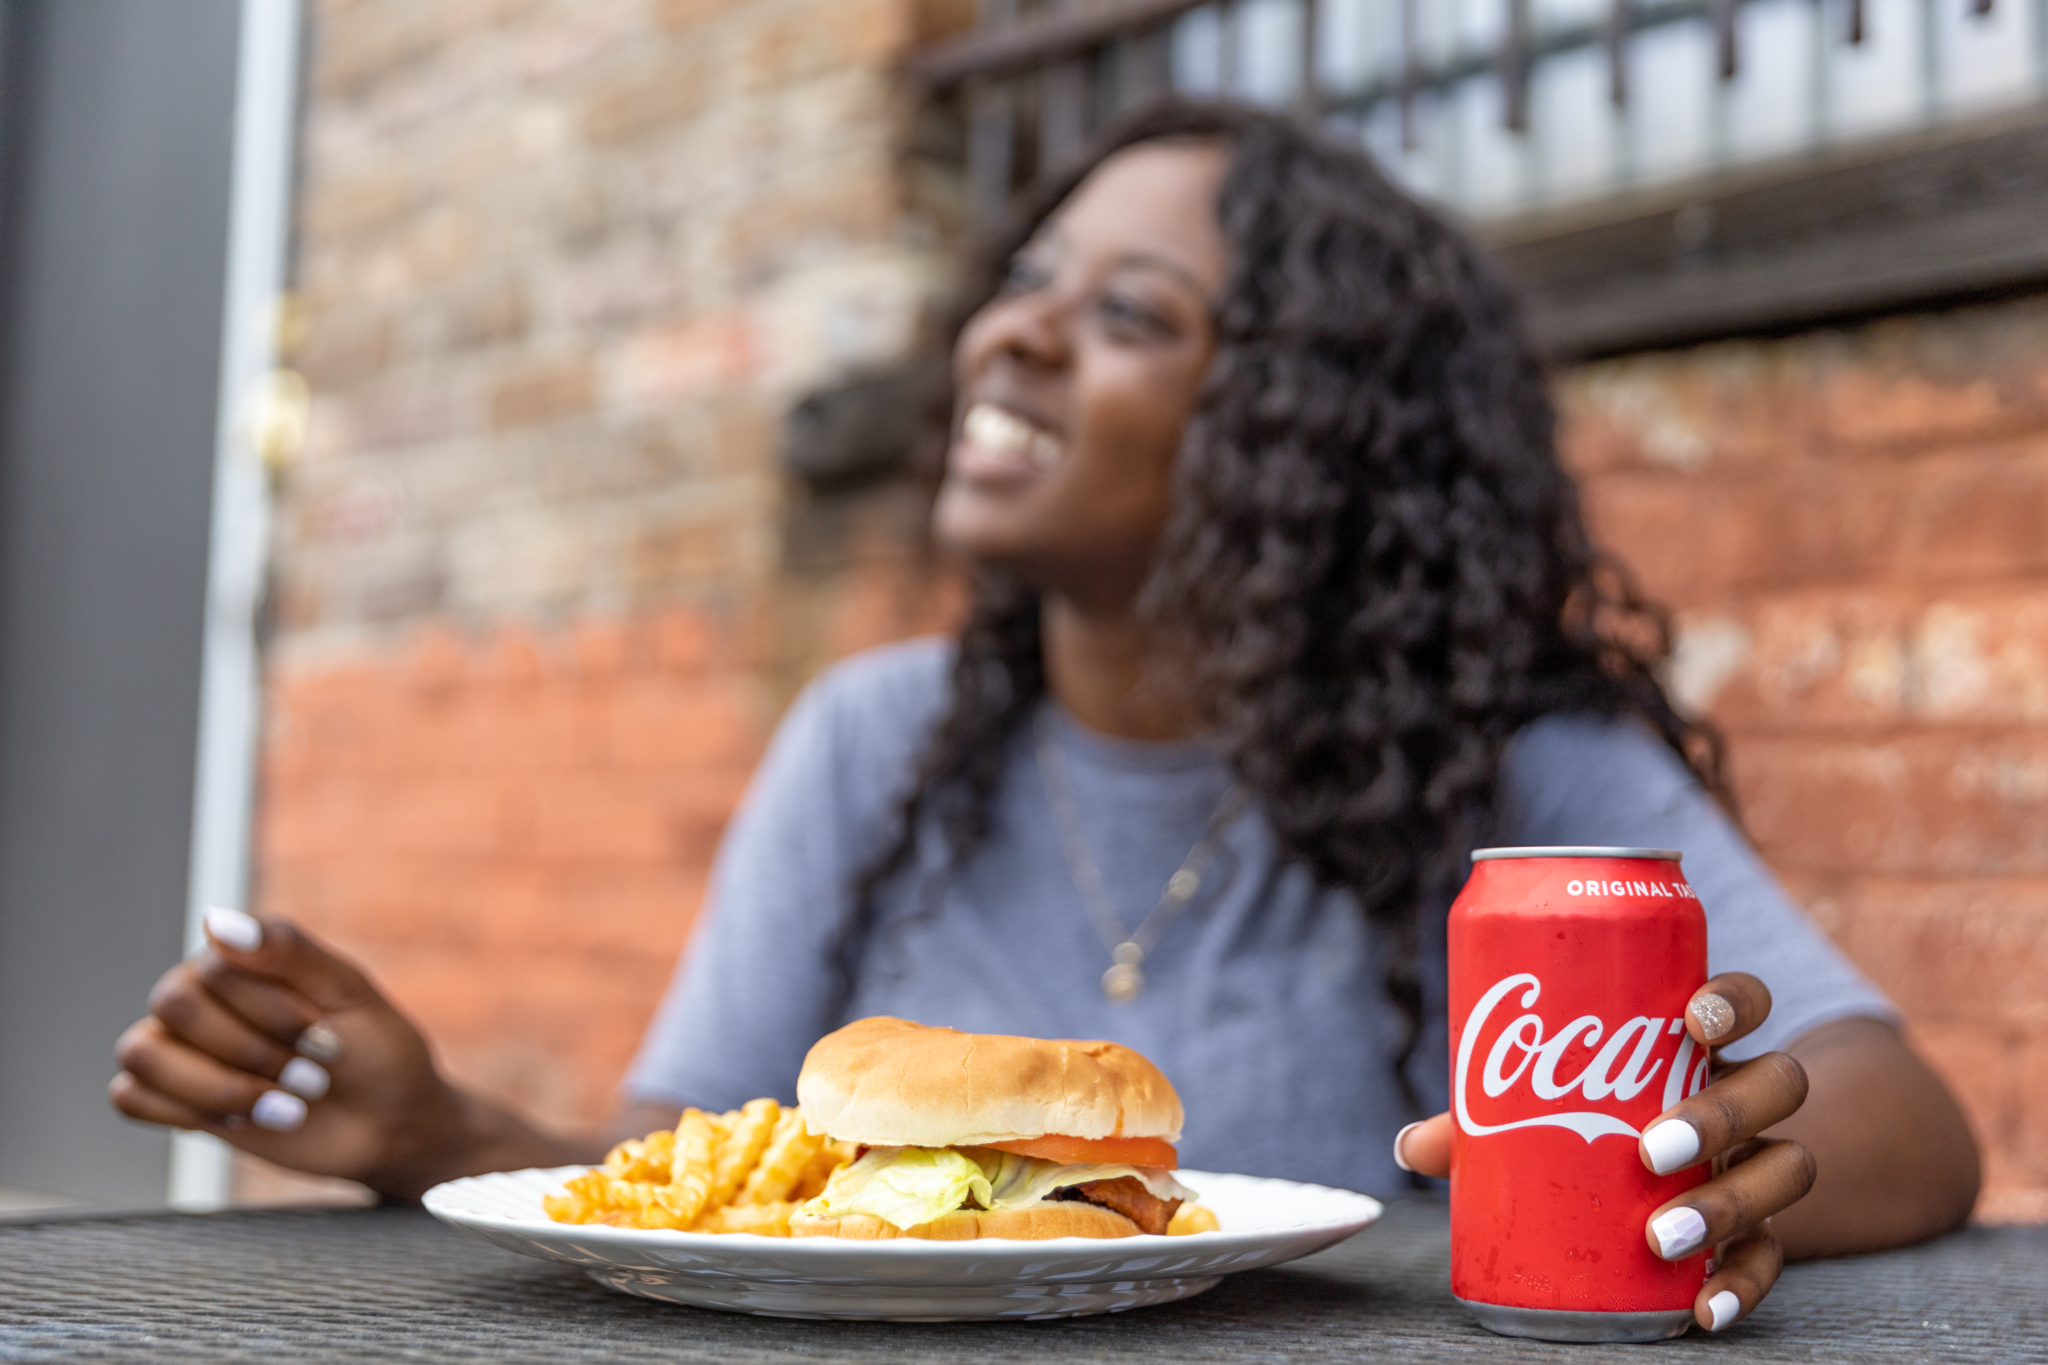 7 Birmingham restaurants that will make your cookout simple